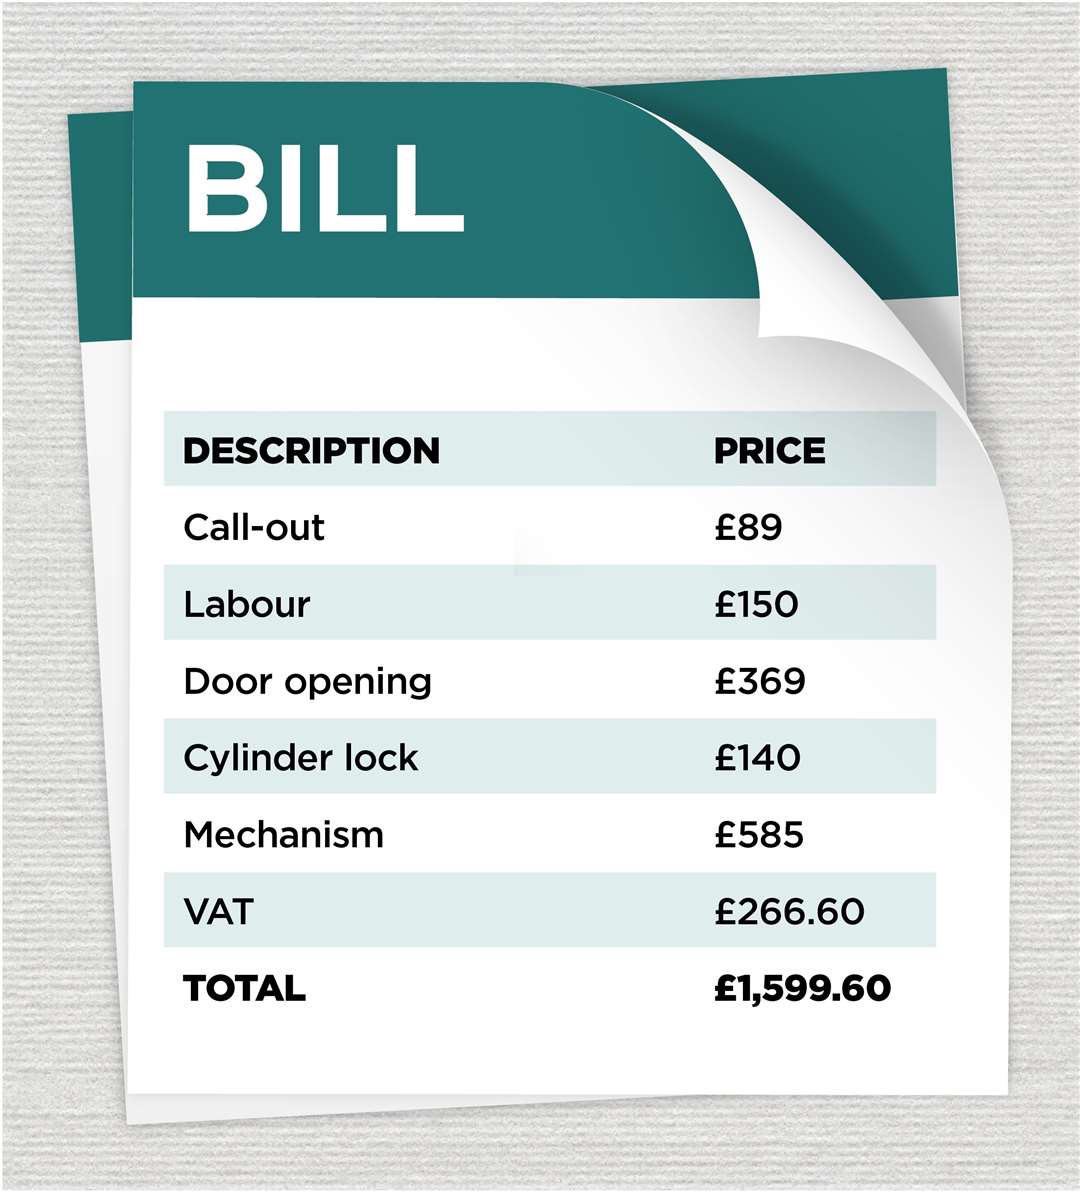 The bill included £585 for a mechanism another locksmith later said had not been installed